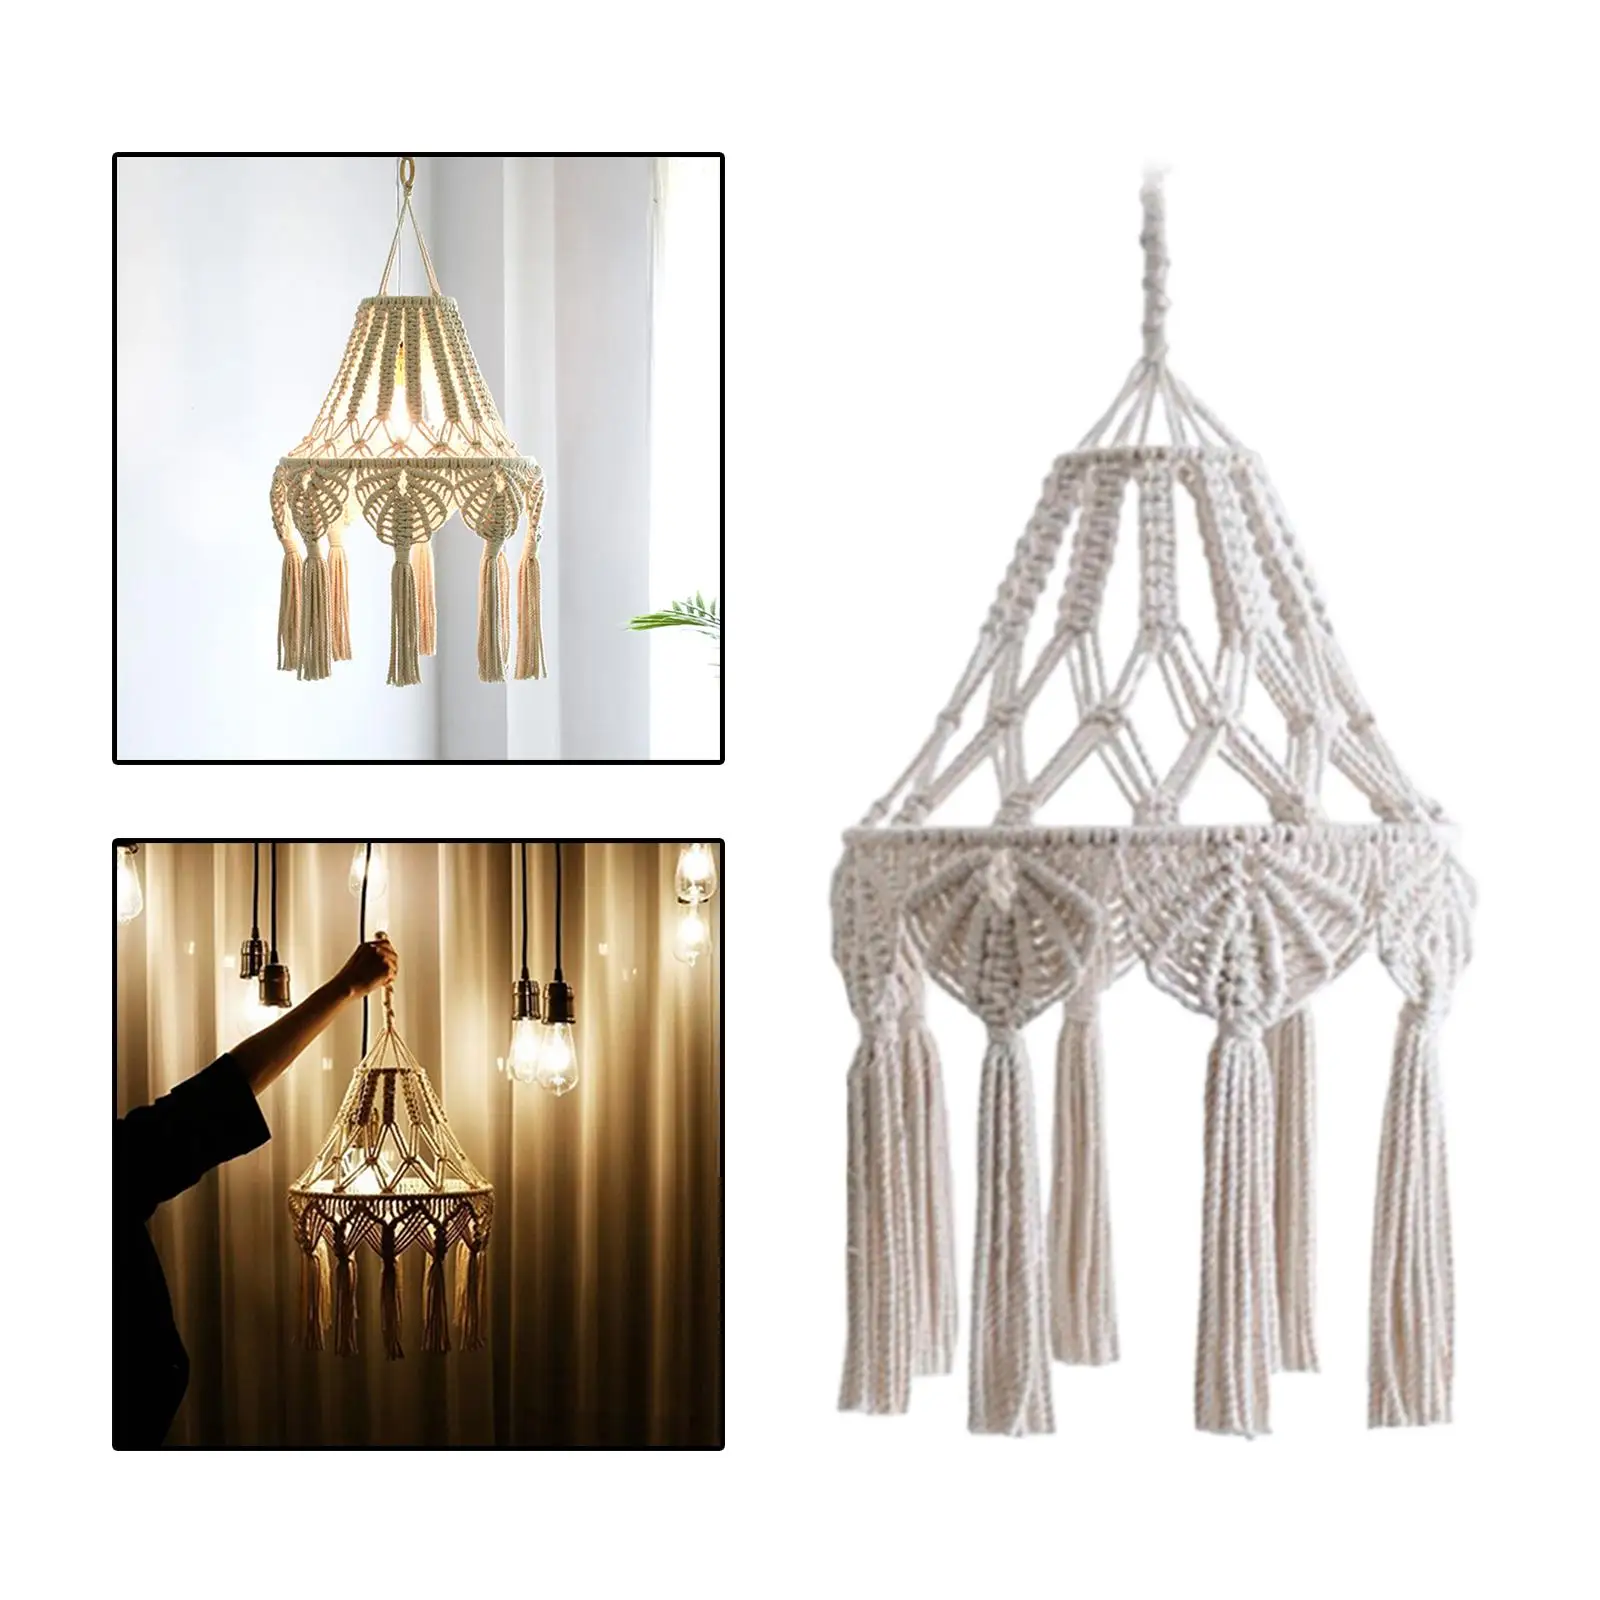 Knitting Macrame Lamp Shade Boho Chandelier Lampshade for Home Wedding Party